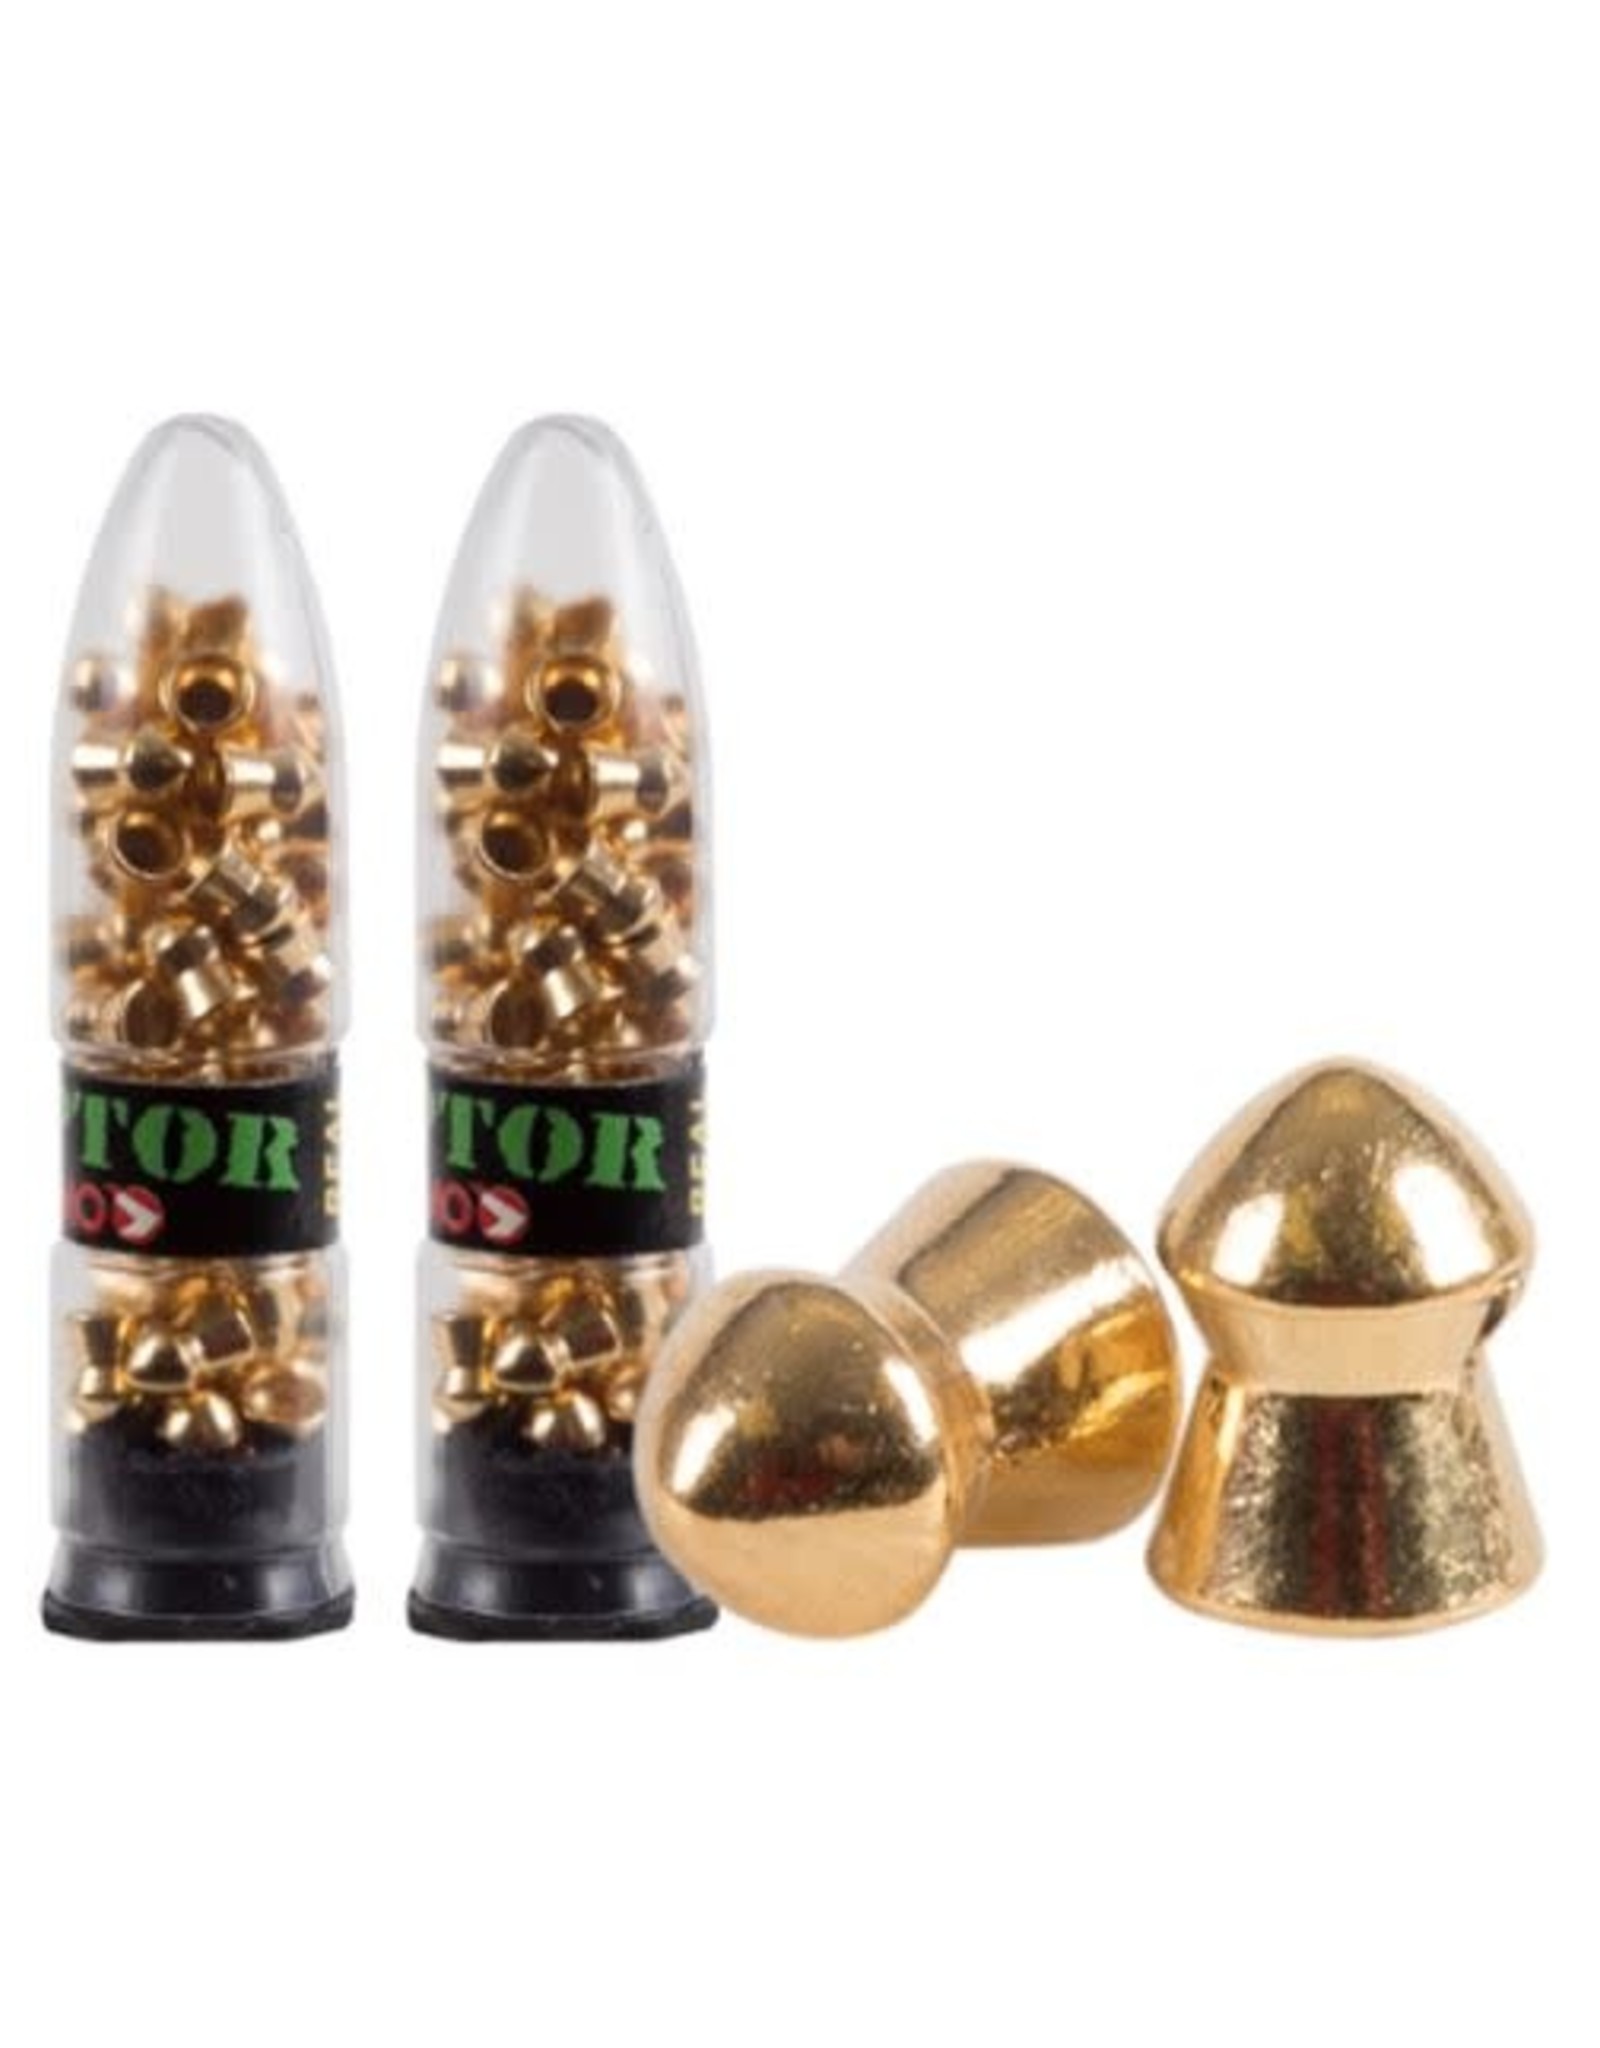 Gamo .177 (4.5mm) Cal. 5.4 Gr. Lead-Free Domed PBA Gold Plated Power Pellets - 100 Rounds by Gamo